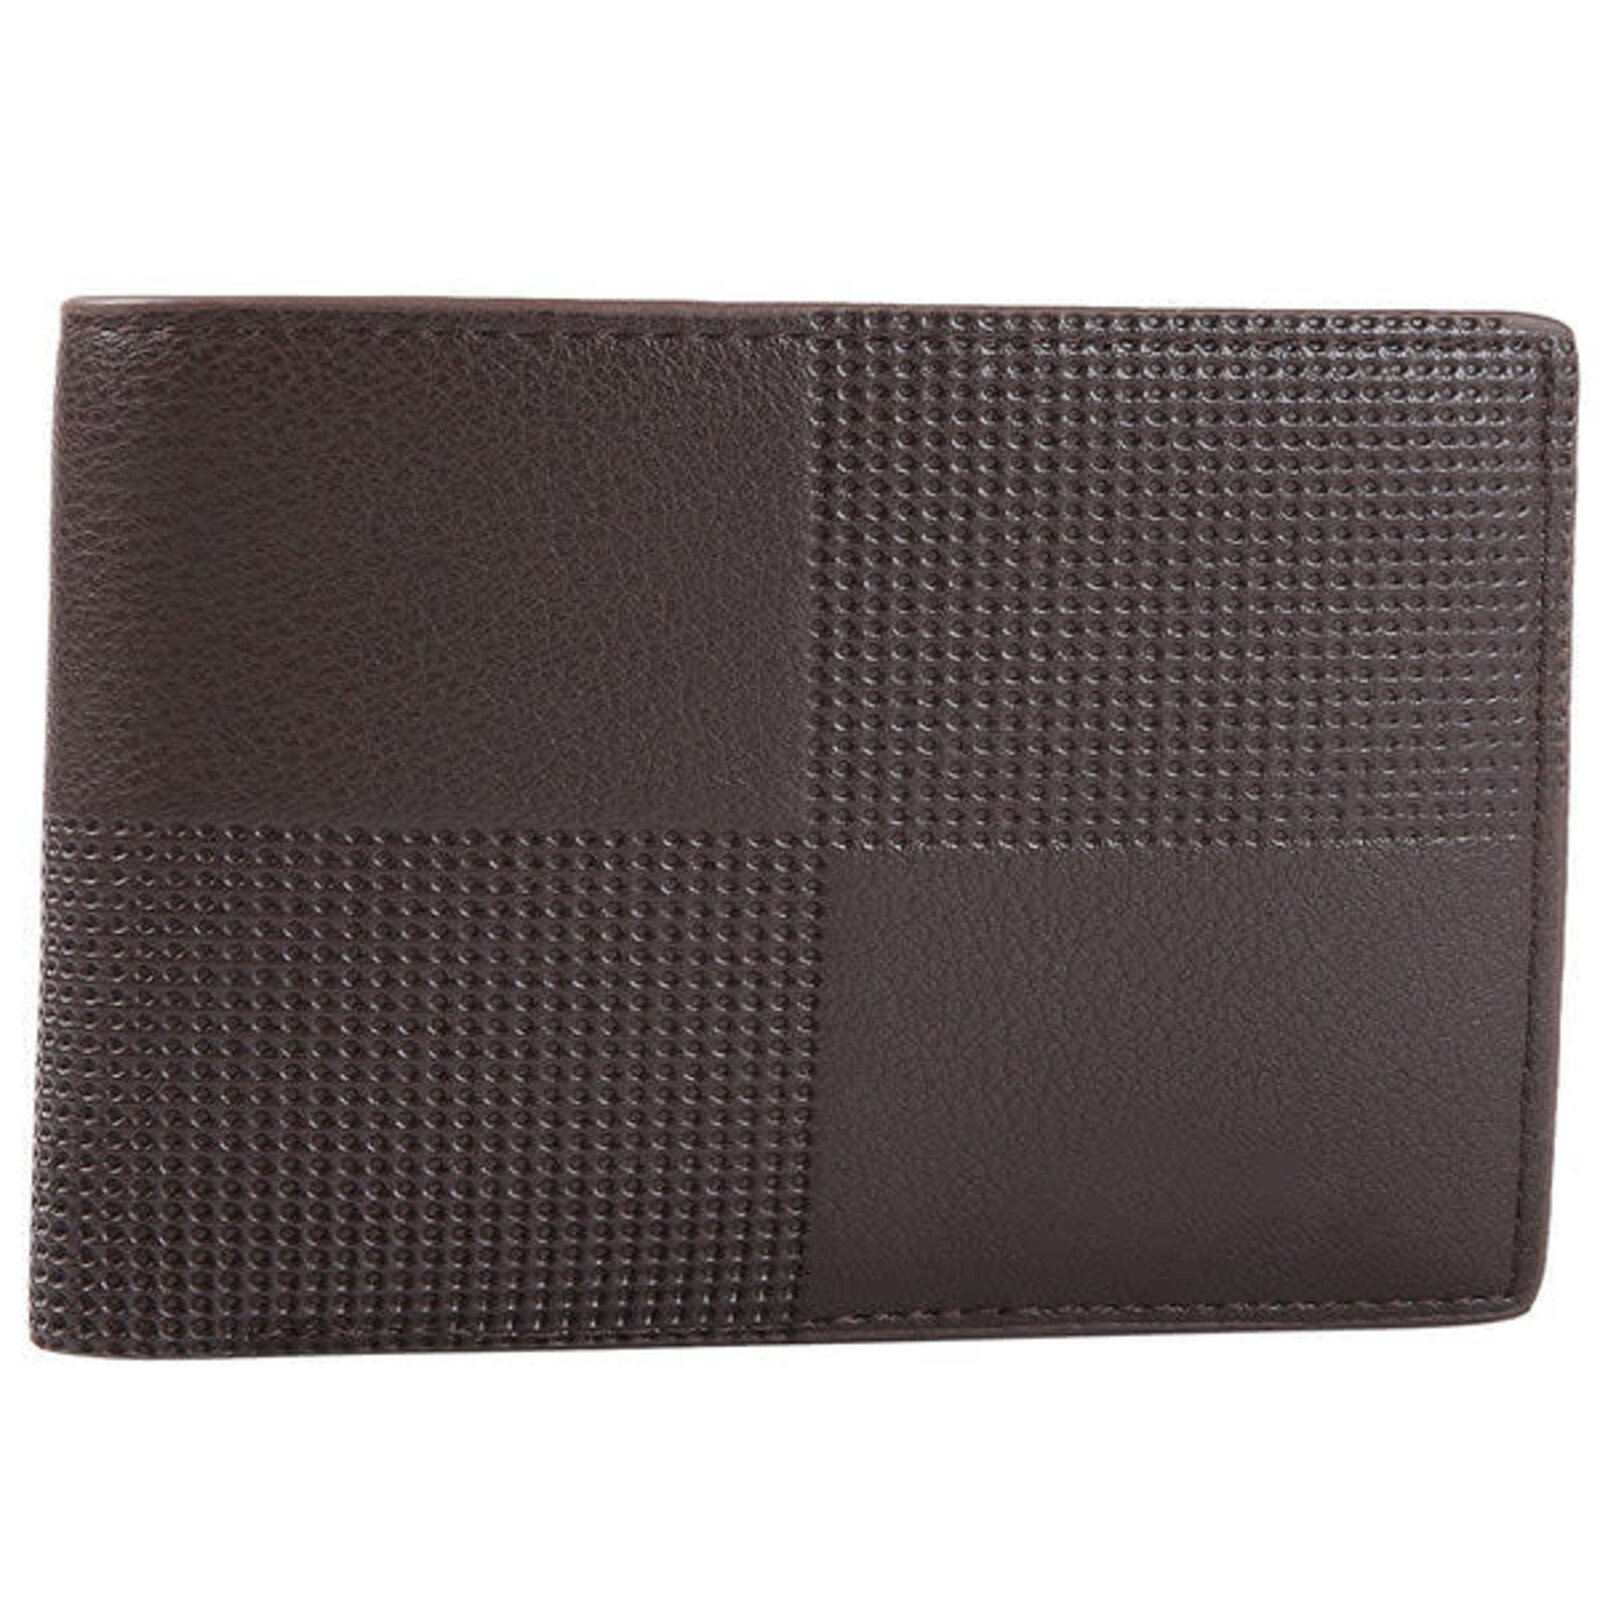 Mad Man Brown Airmail Wallet  3065B loading=